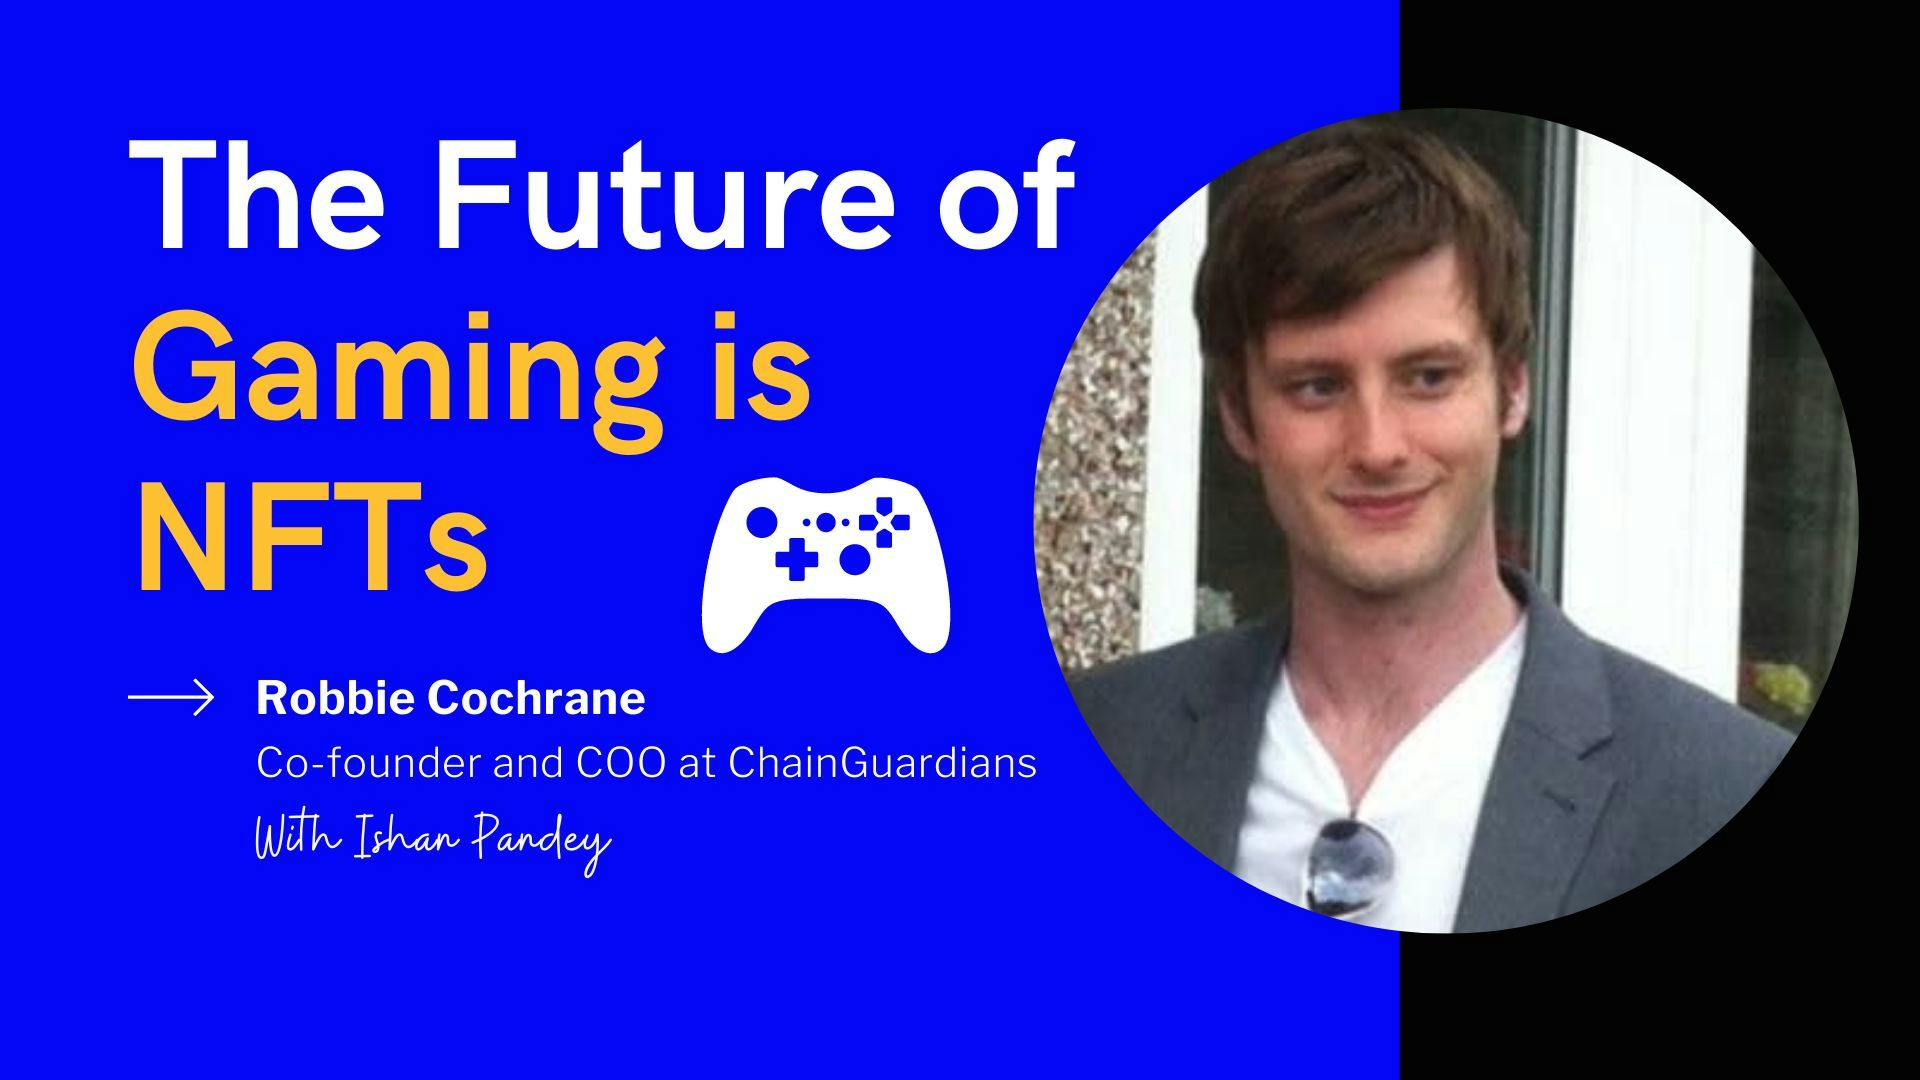 /the-future-of-gaming-is-nfts-robbie-cochrane-co-founder-of-chainguardians-2qp33y6 feature image